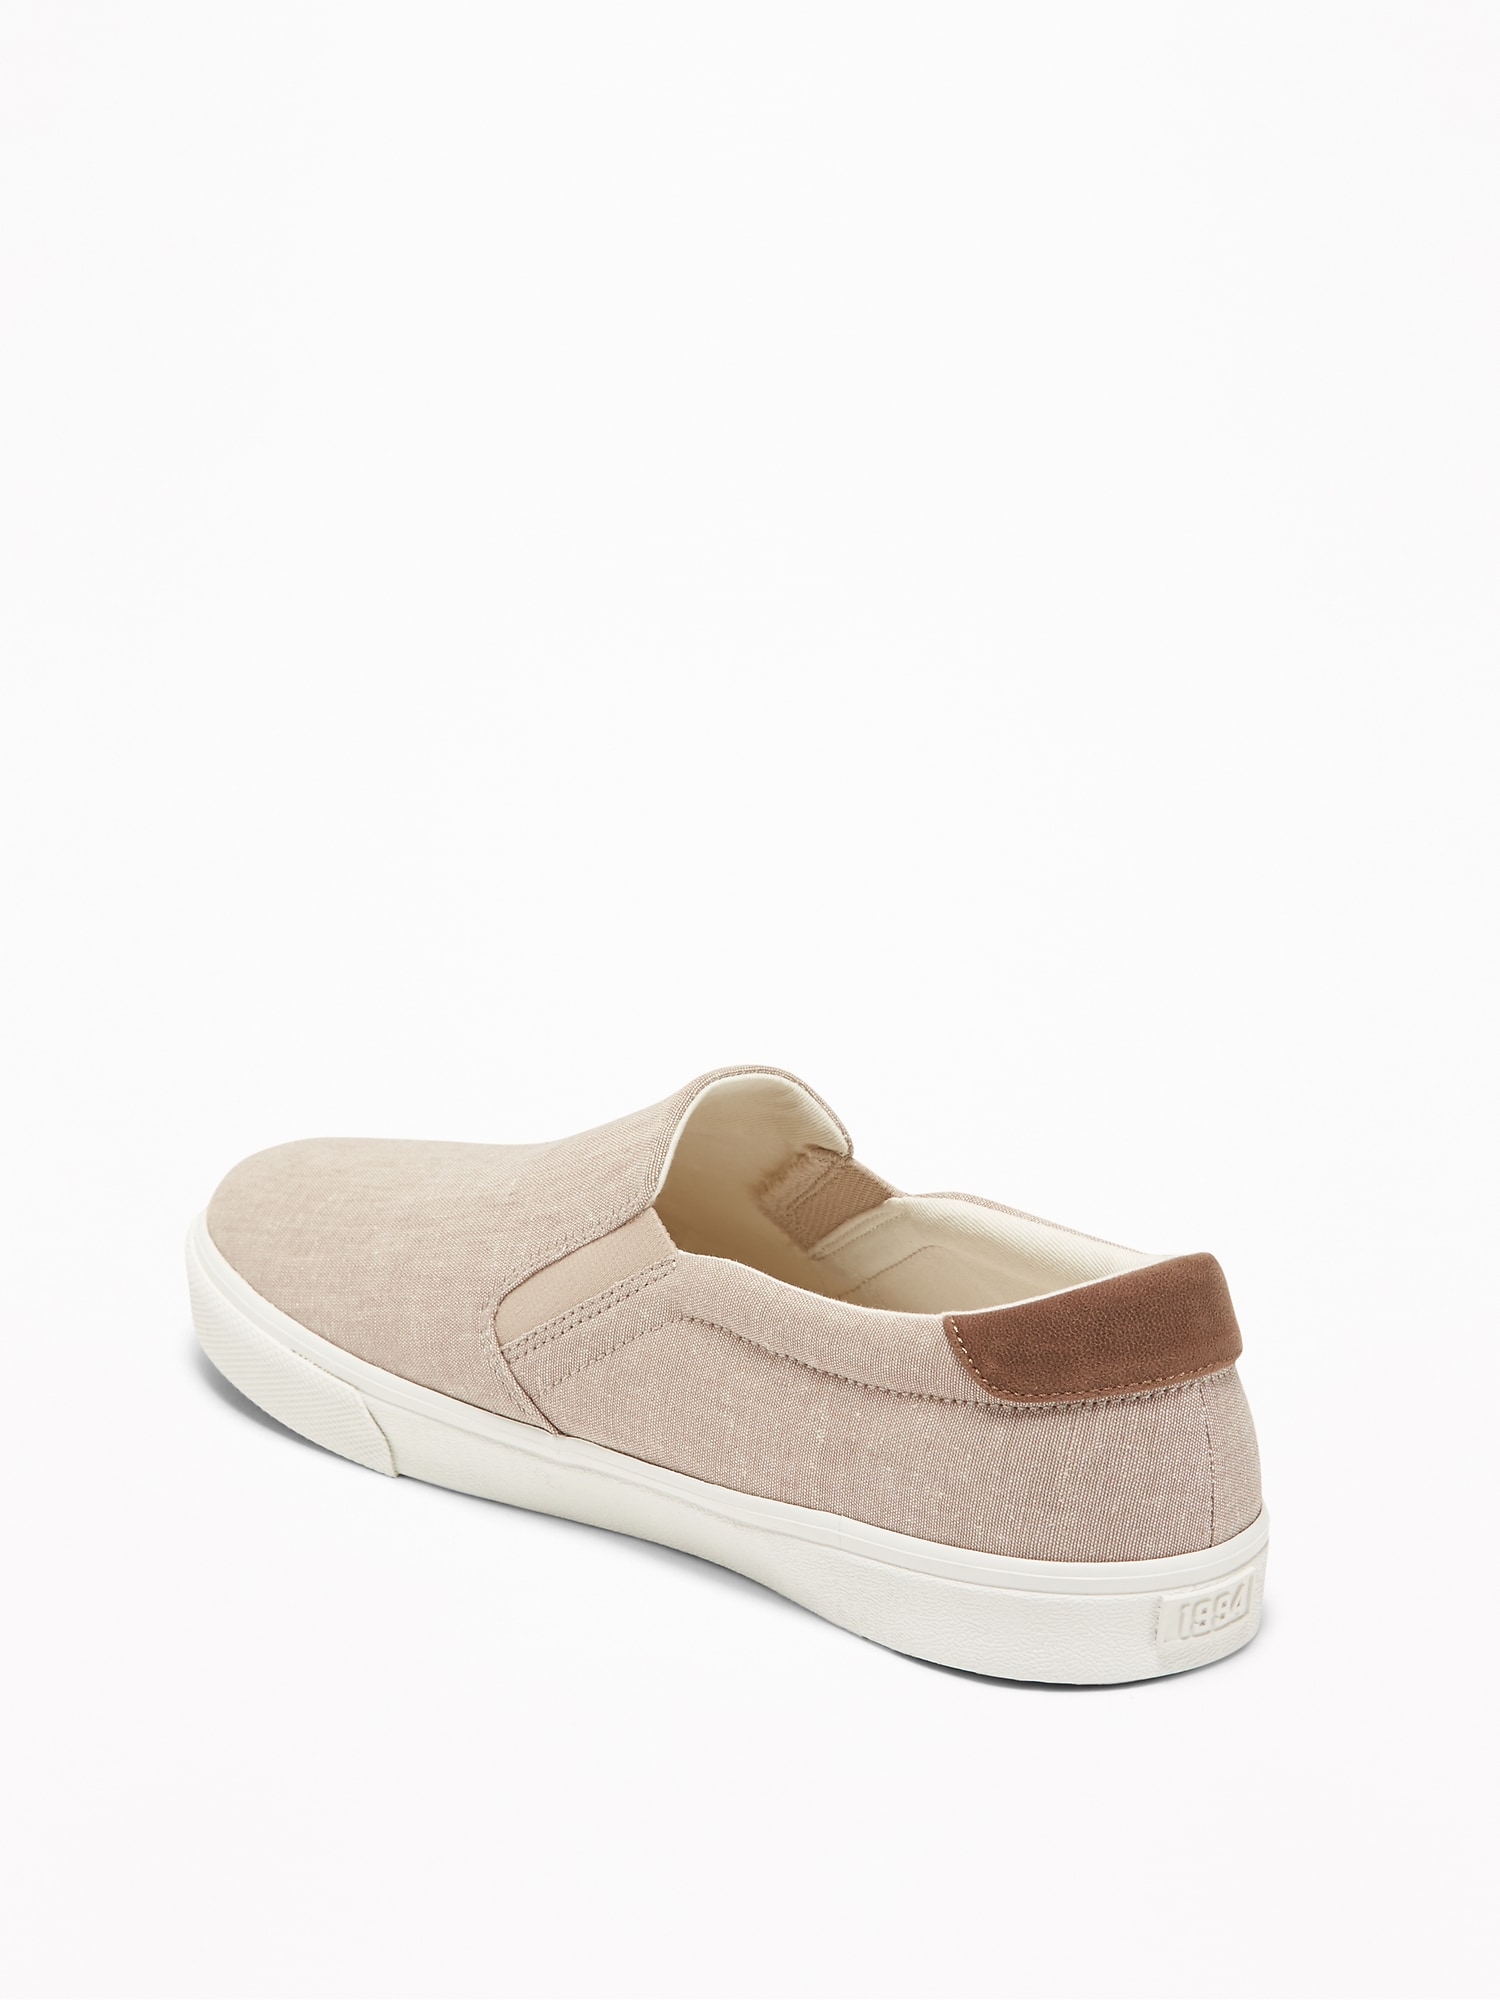 old navy mens slip on shoes